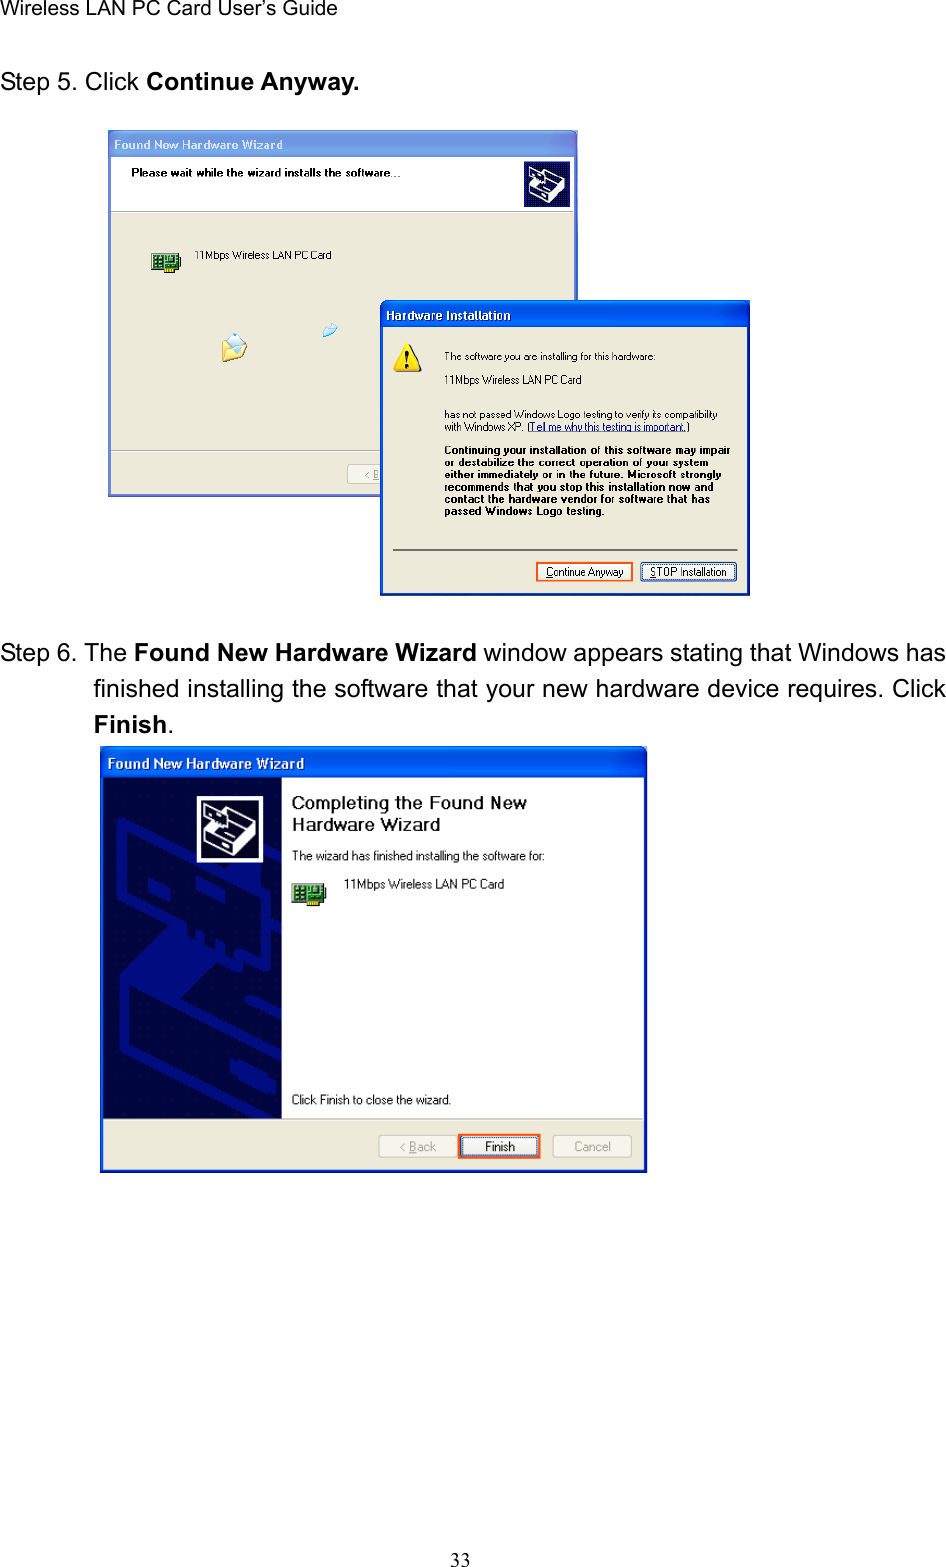 Wireless LAN PC Card User’s Guide33Step 5. Click Continue Anyway.       Step 6. The Found New Hardware Wizard window appears stating that Windows hasfinished installing the software that your new hardware device requires. ClickFinish.        